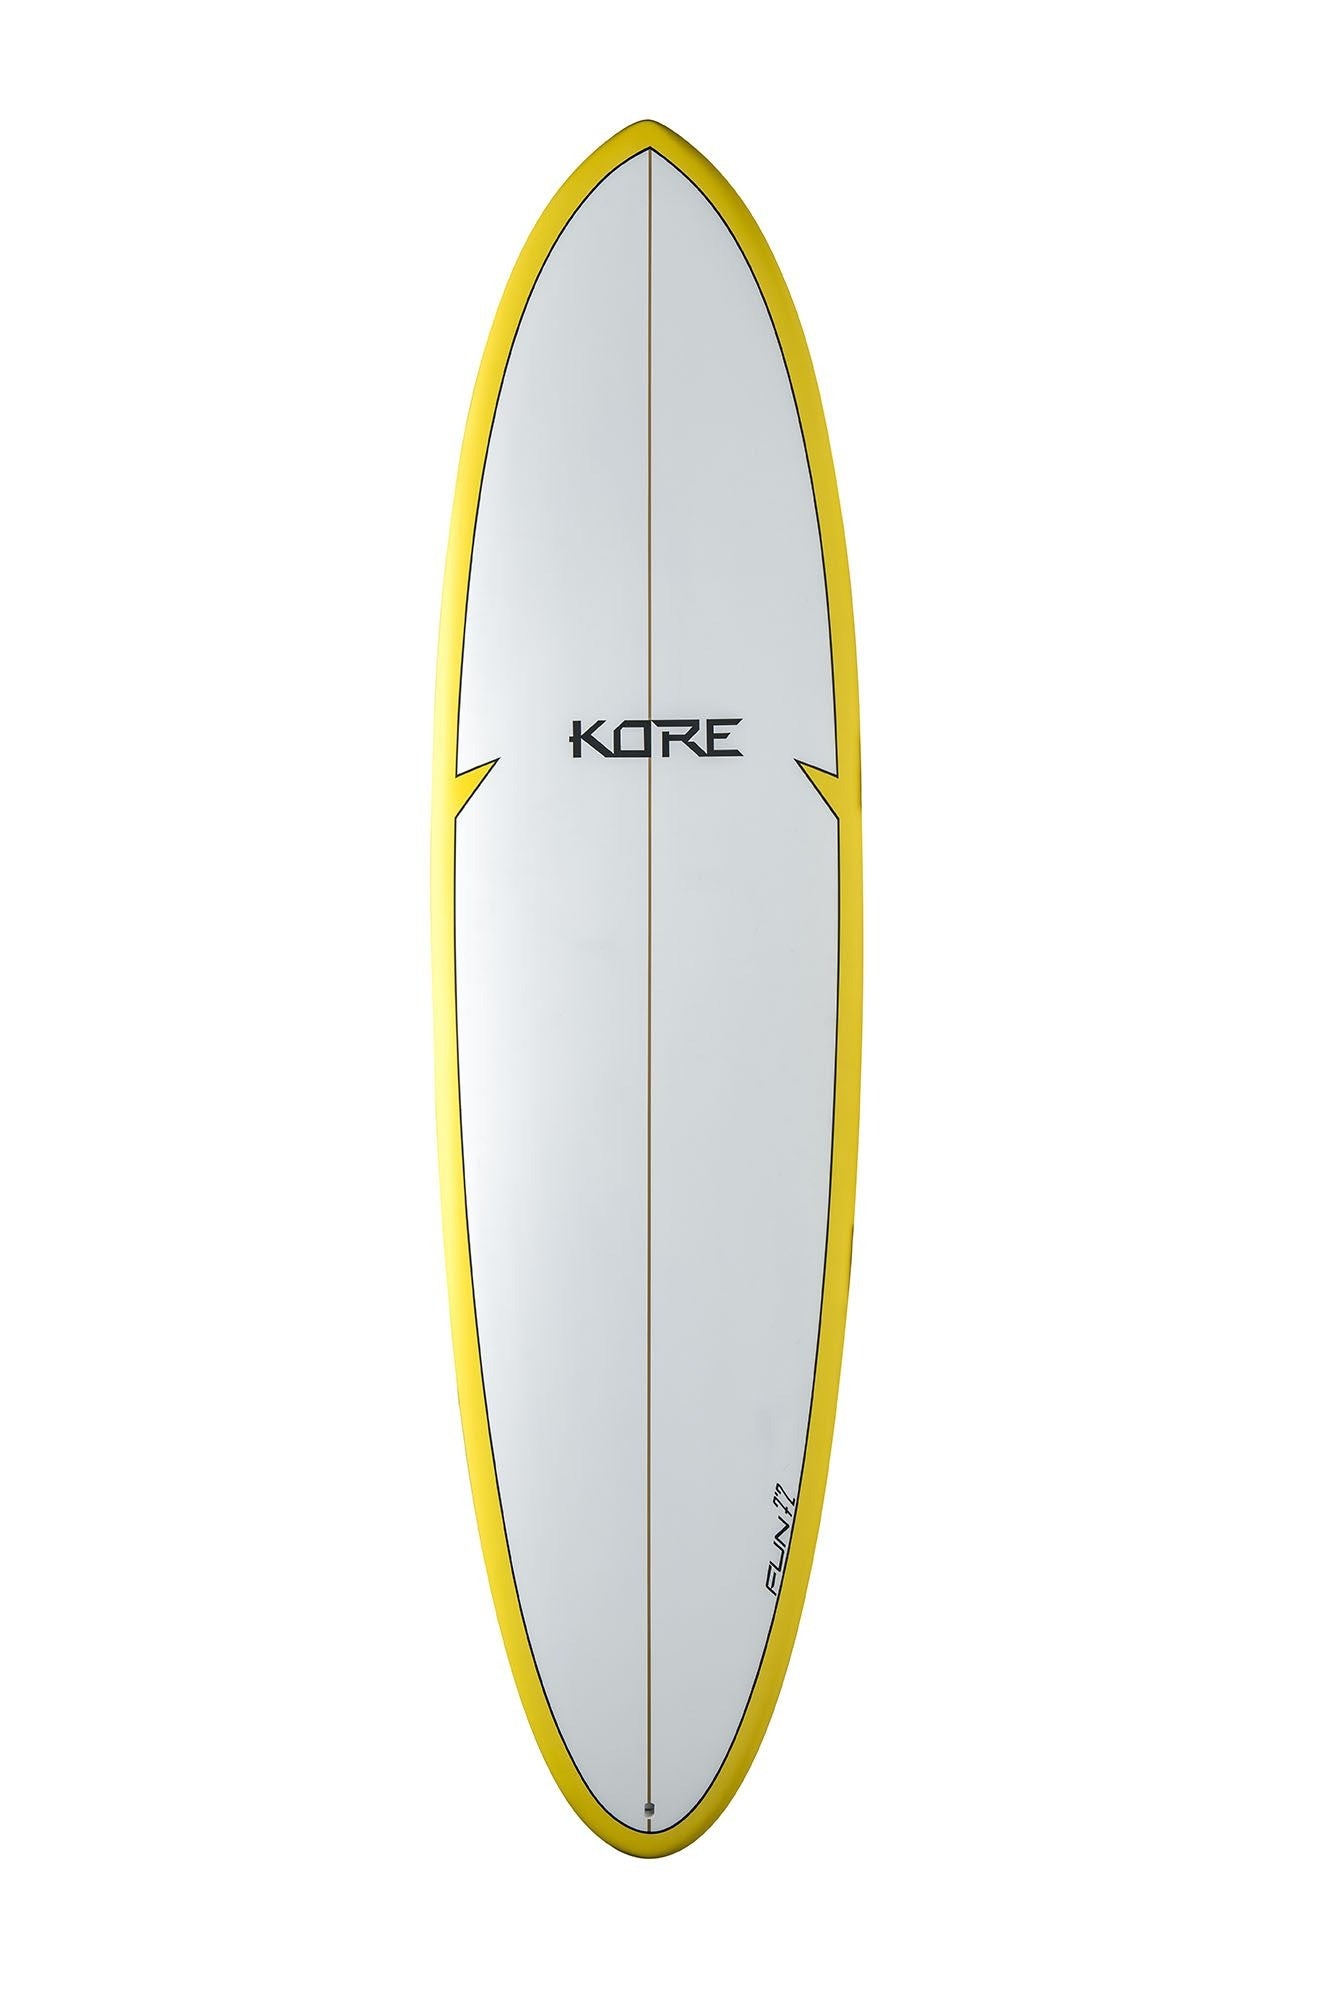 Kore Fun 6ft 8 Mid Length Surfboard White/Red - Boards360